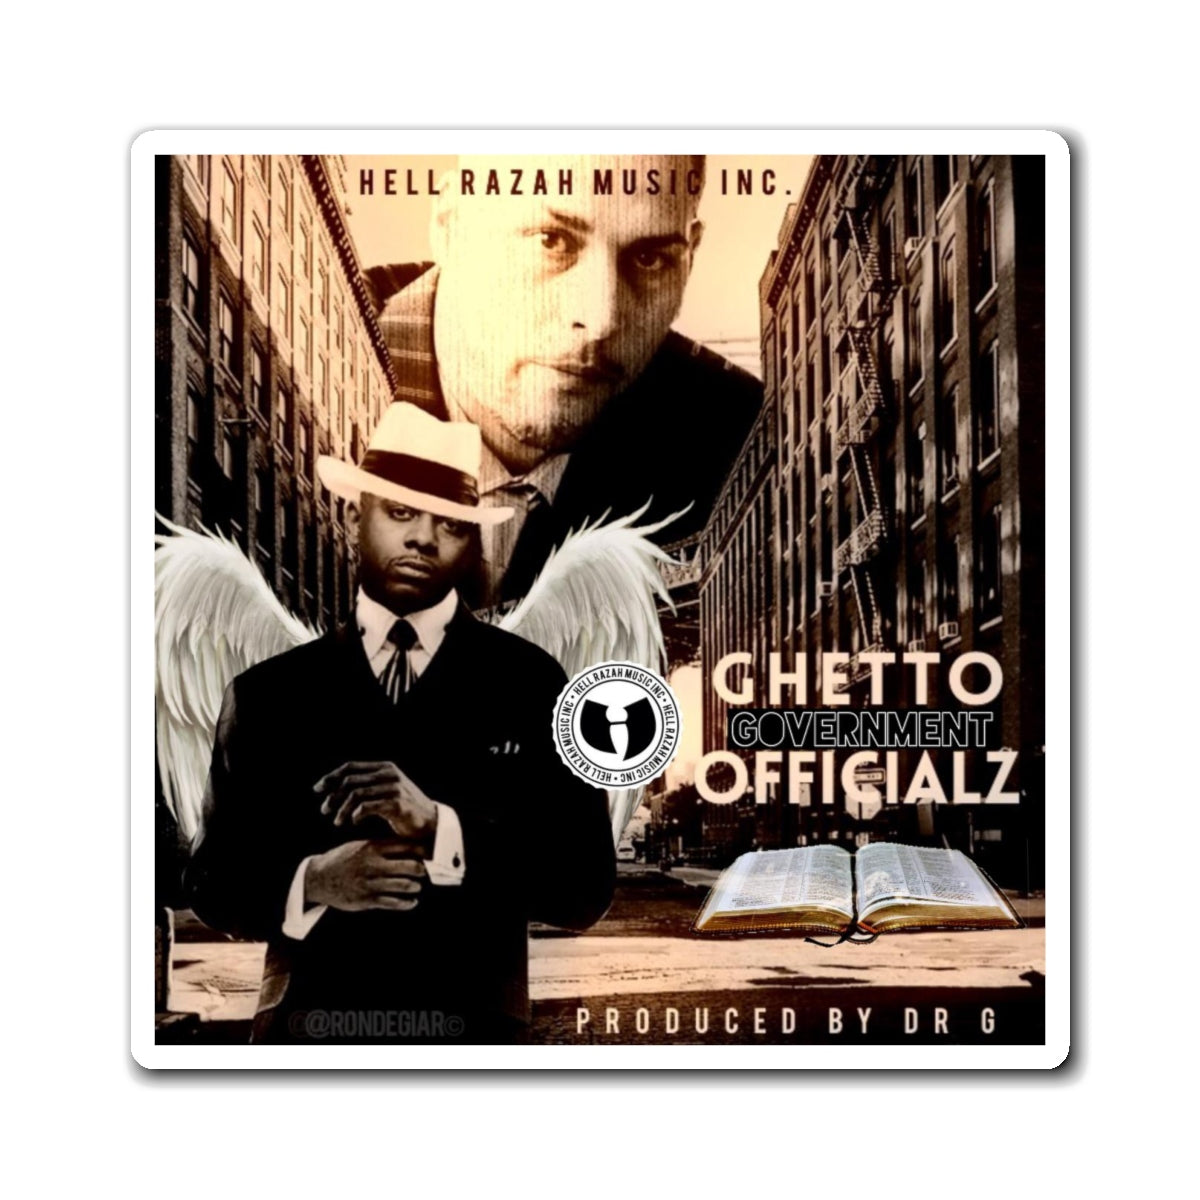 HellRazah Music Inc. - Ghetto Gov't Officialz Collectible Magnet